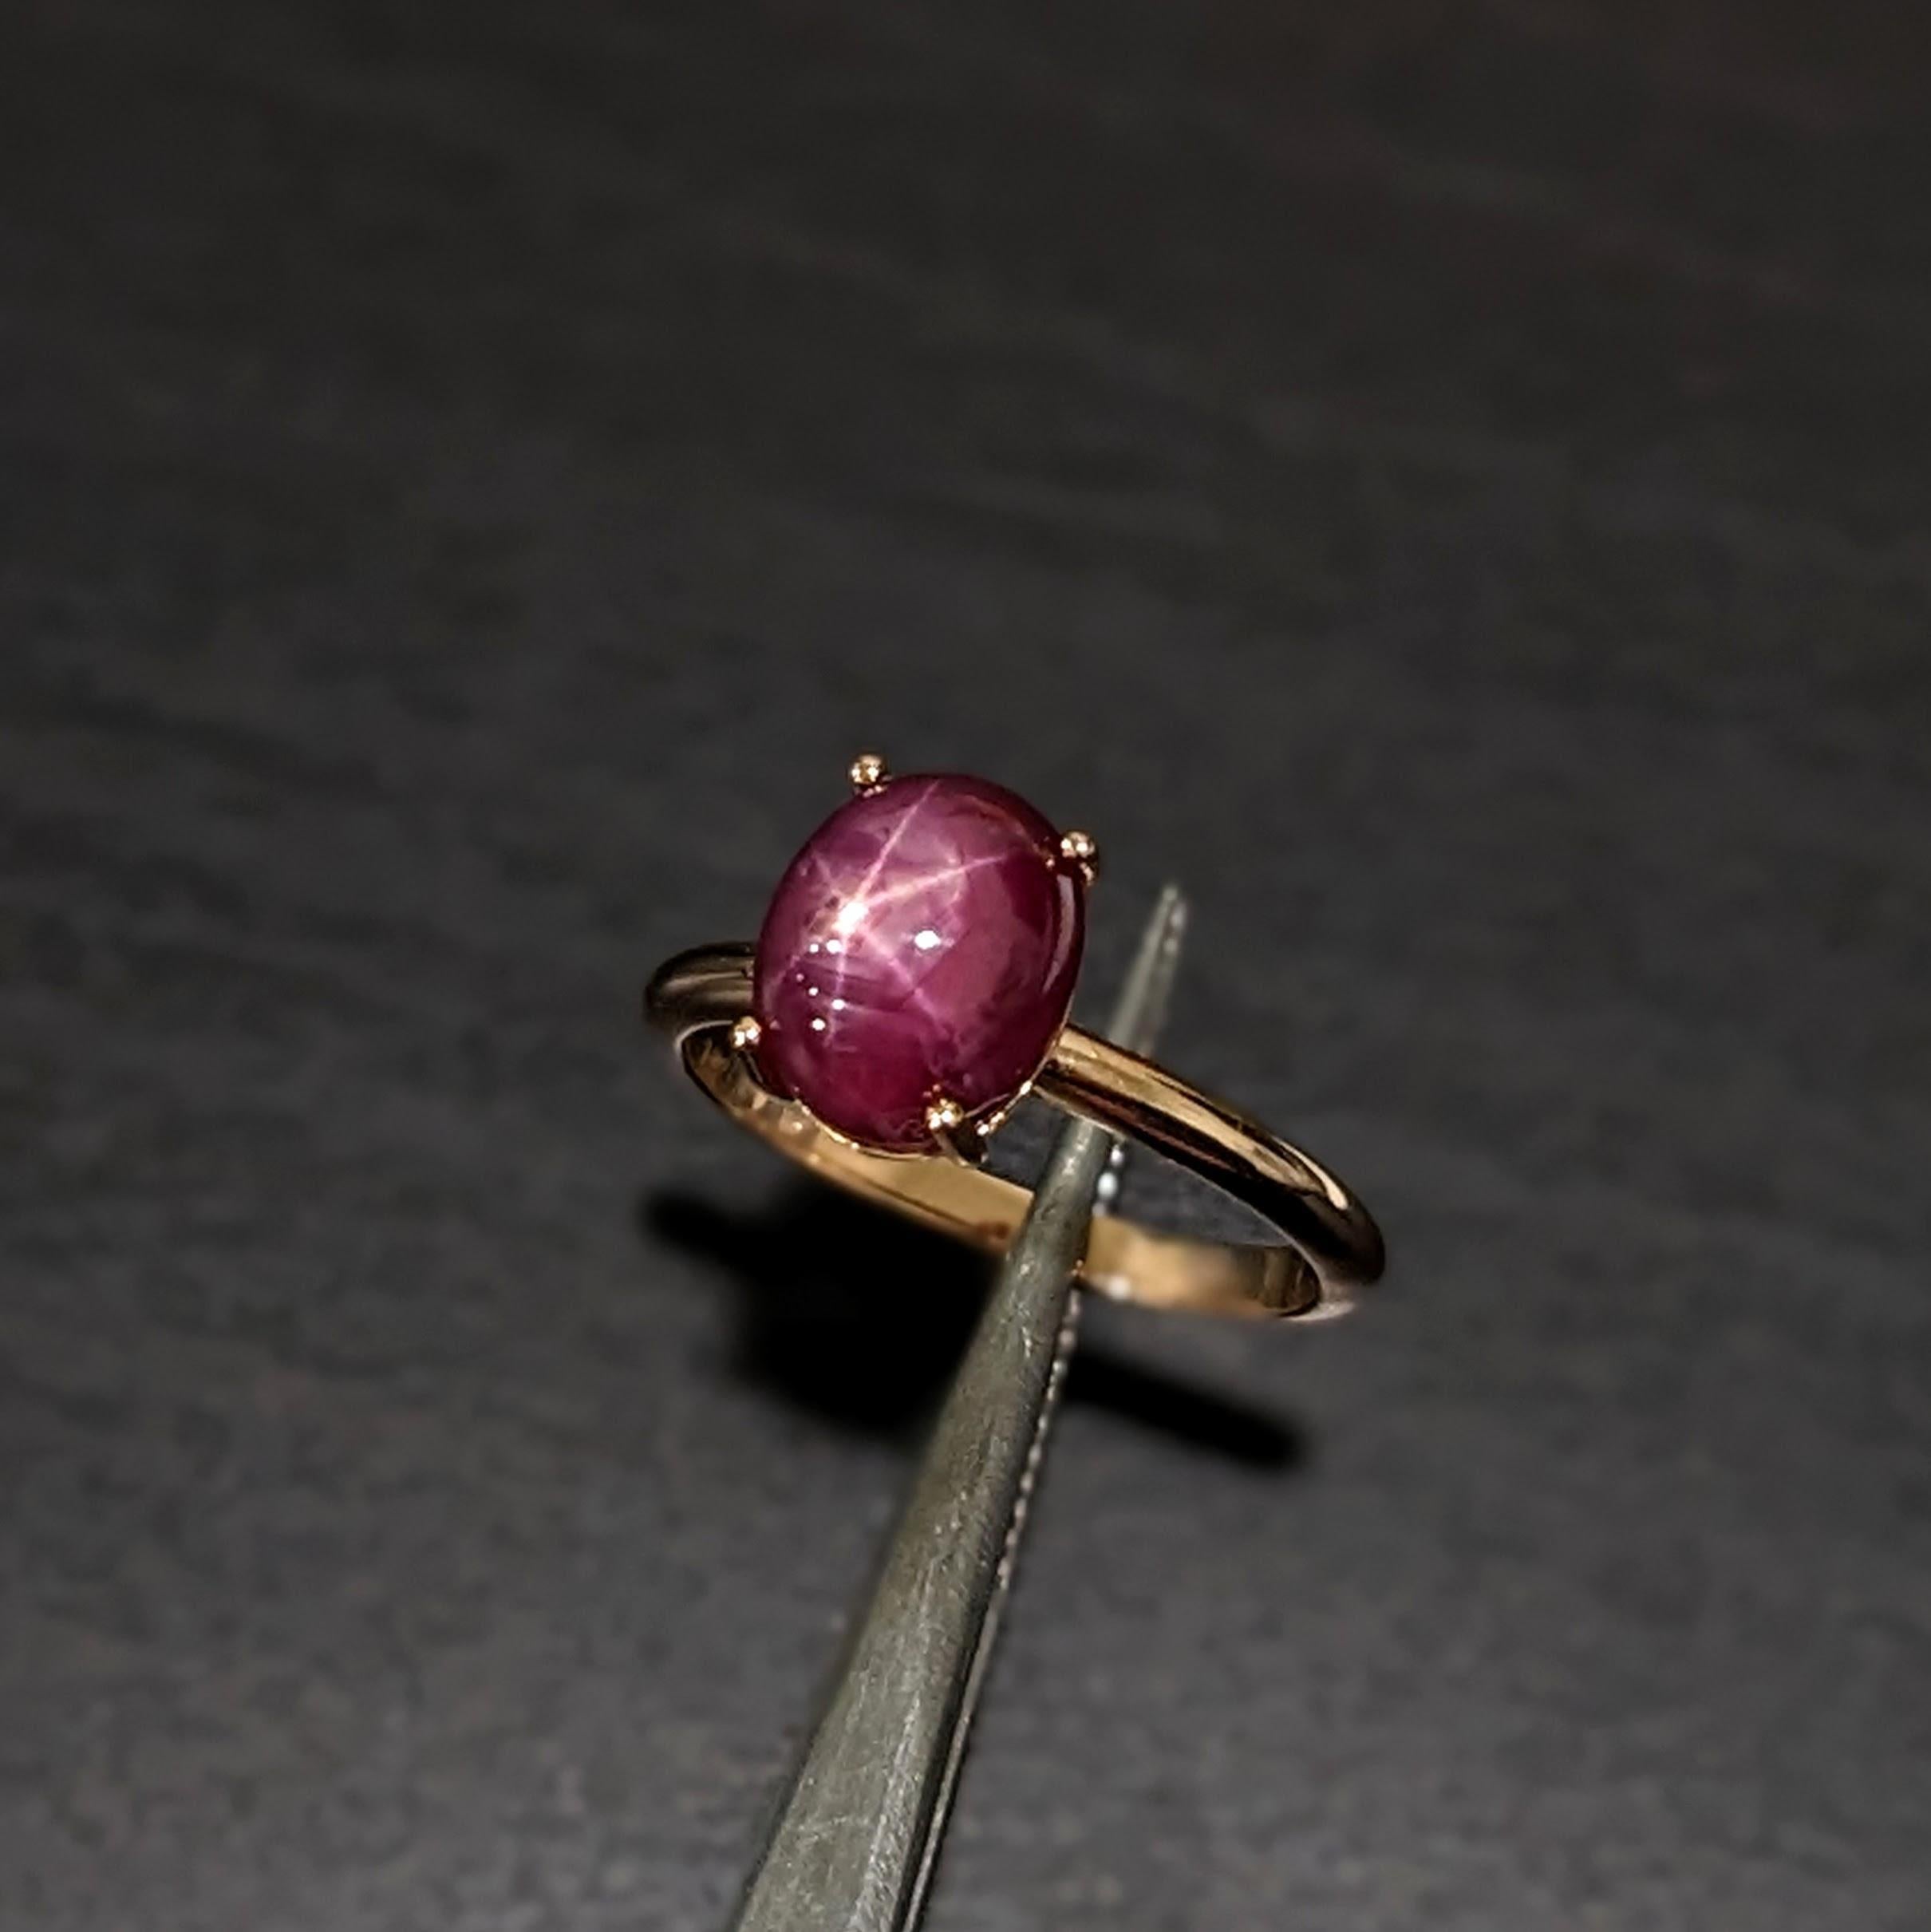 A star ruby is a type of gemstone that displays a six-rayed star when light is shone onto it. Star rubies are unique and mystical gemstones. This art deco solitaire ring features a stunning red star ruby in a single prong setting.